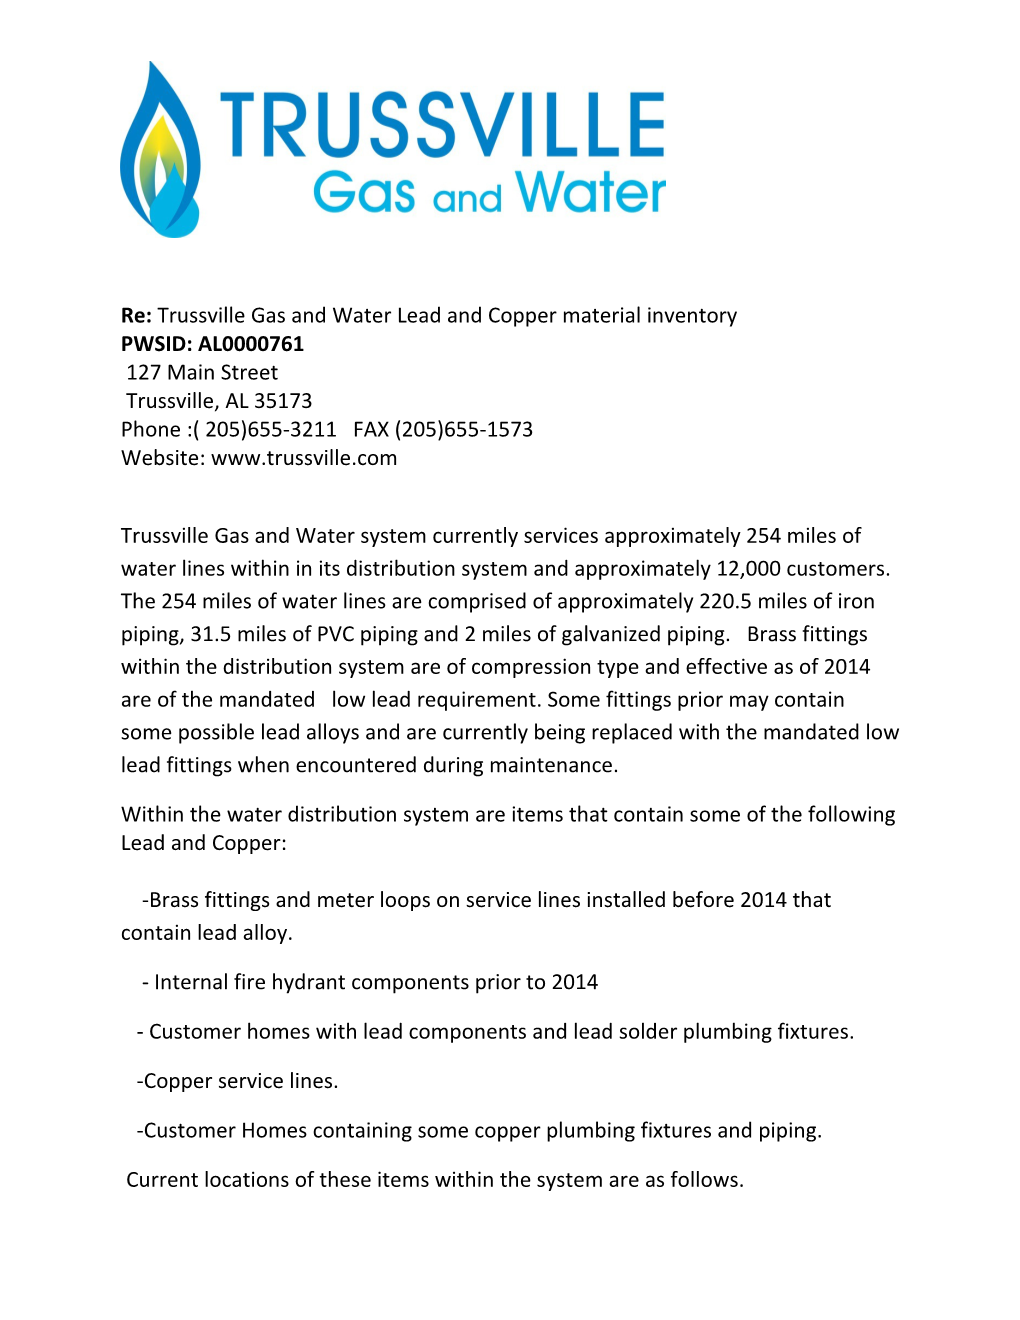 Re: Trussville Gas and Water Lead and Copper Material Inventory PWSID: AL0000761